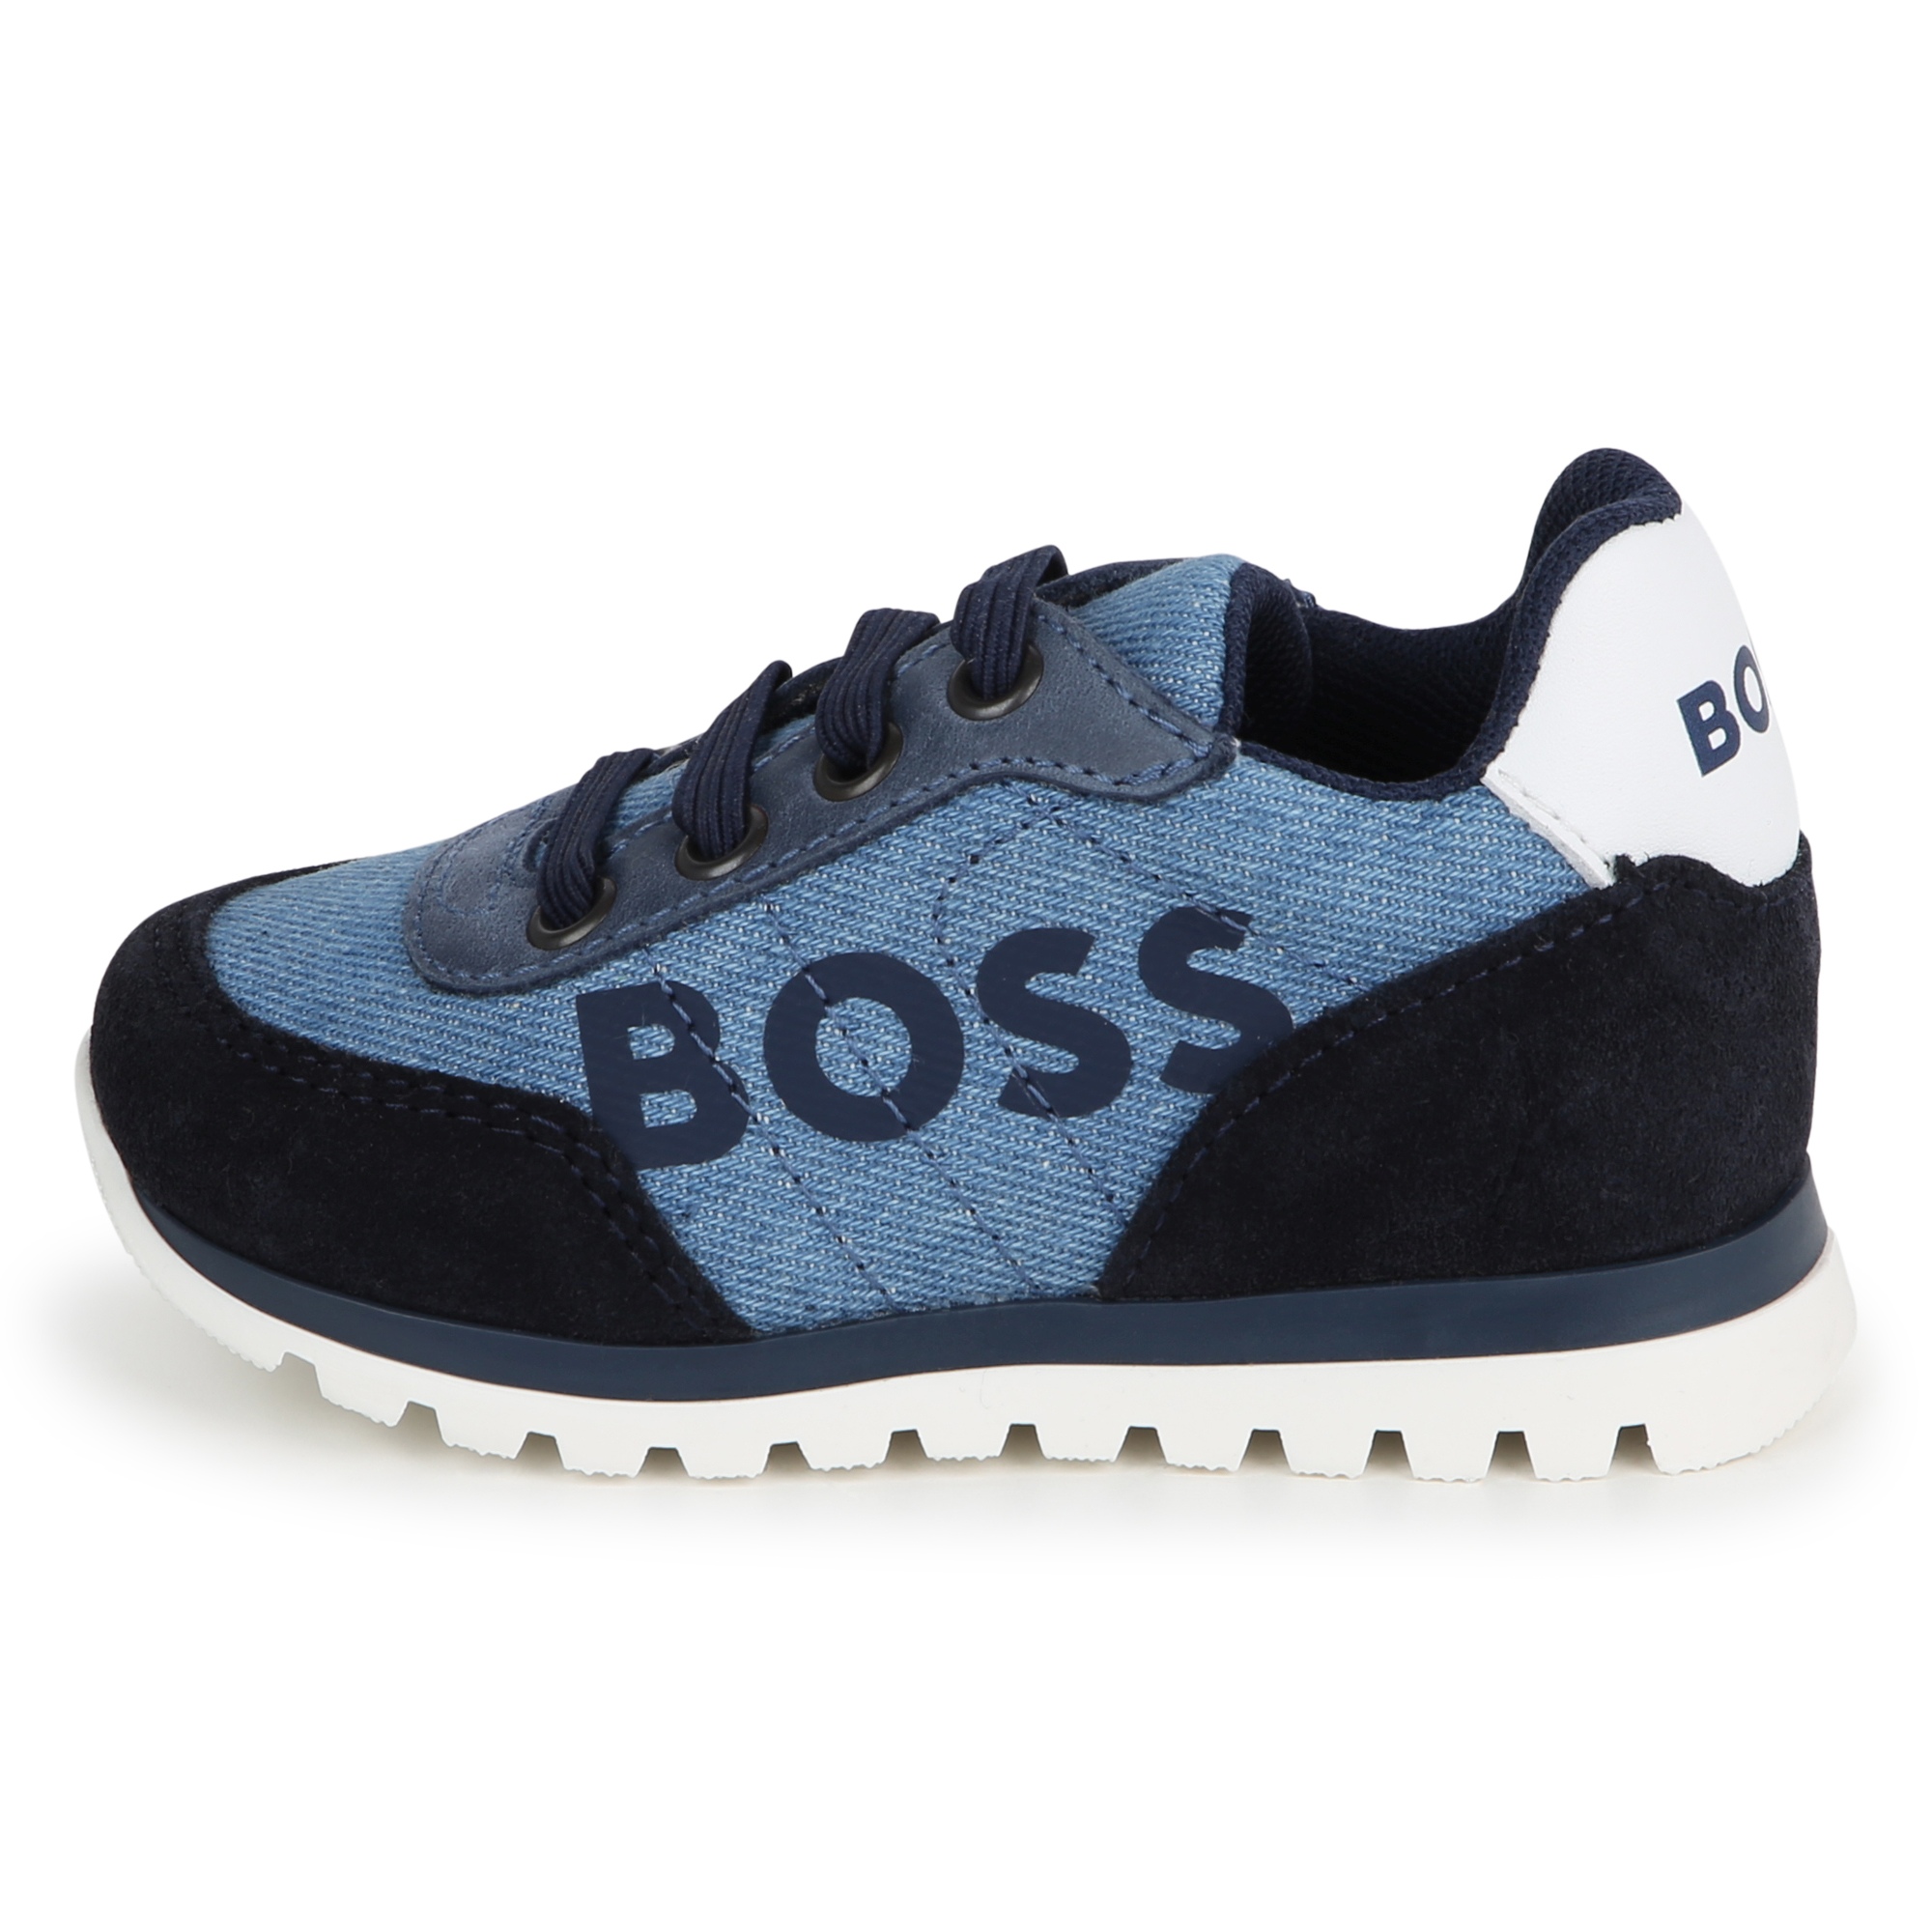 Trainers with elastic laces BOSS for BOY